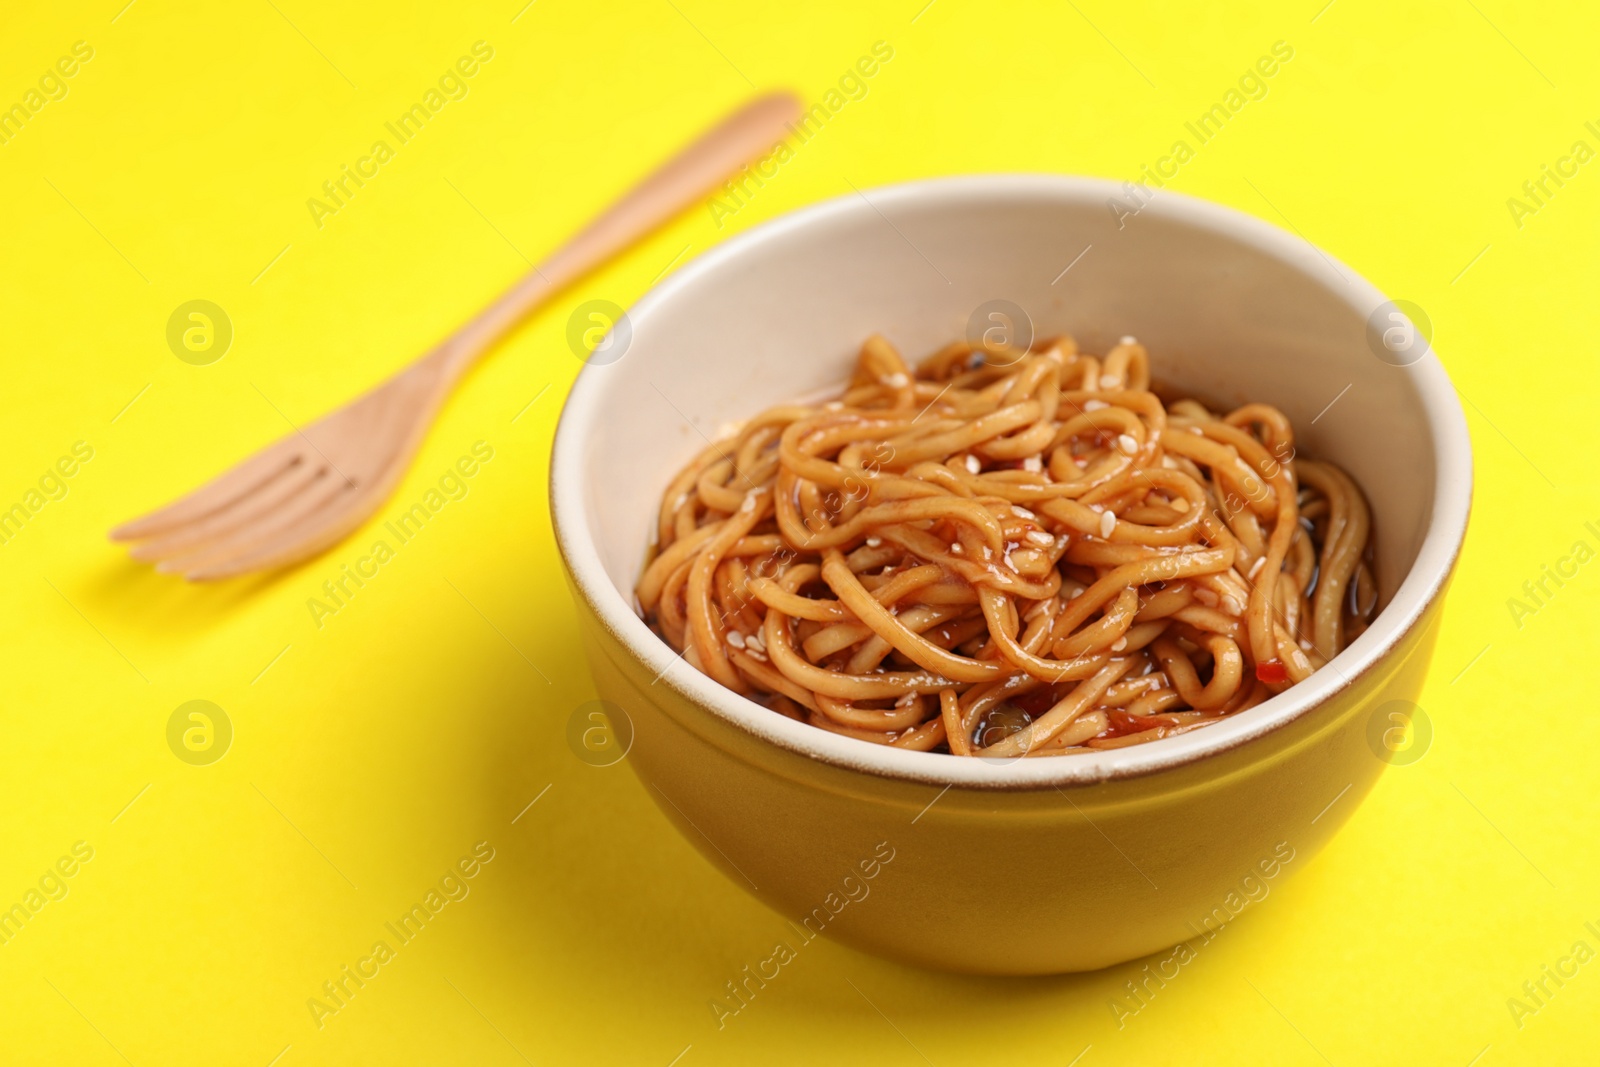 Photo of Cooked noodles and wooden fork on yellow background